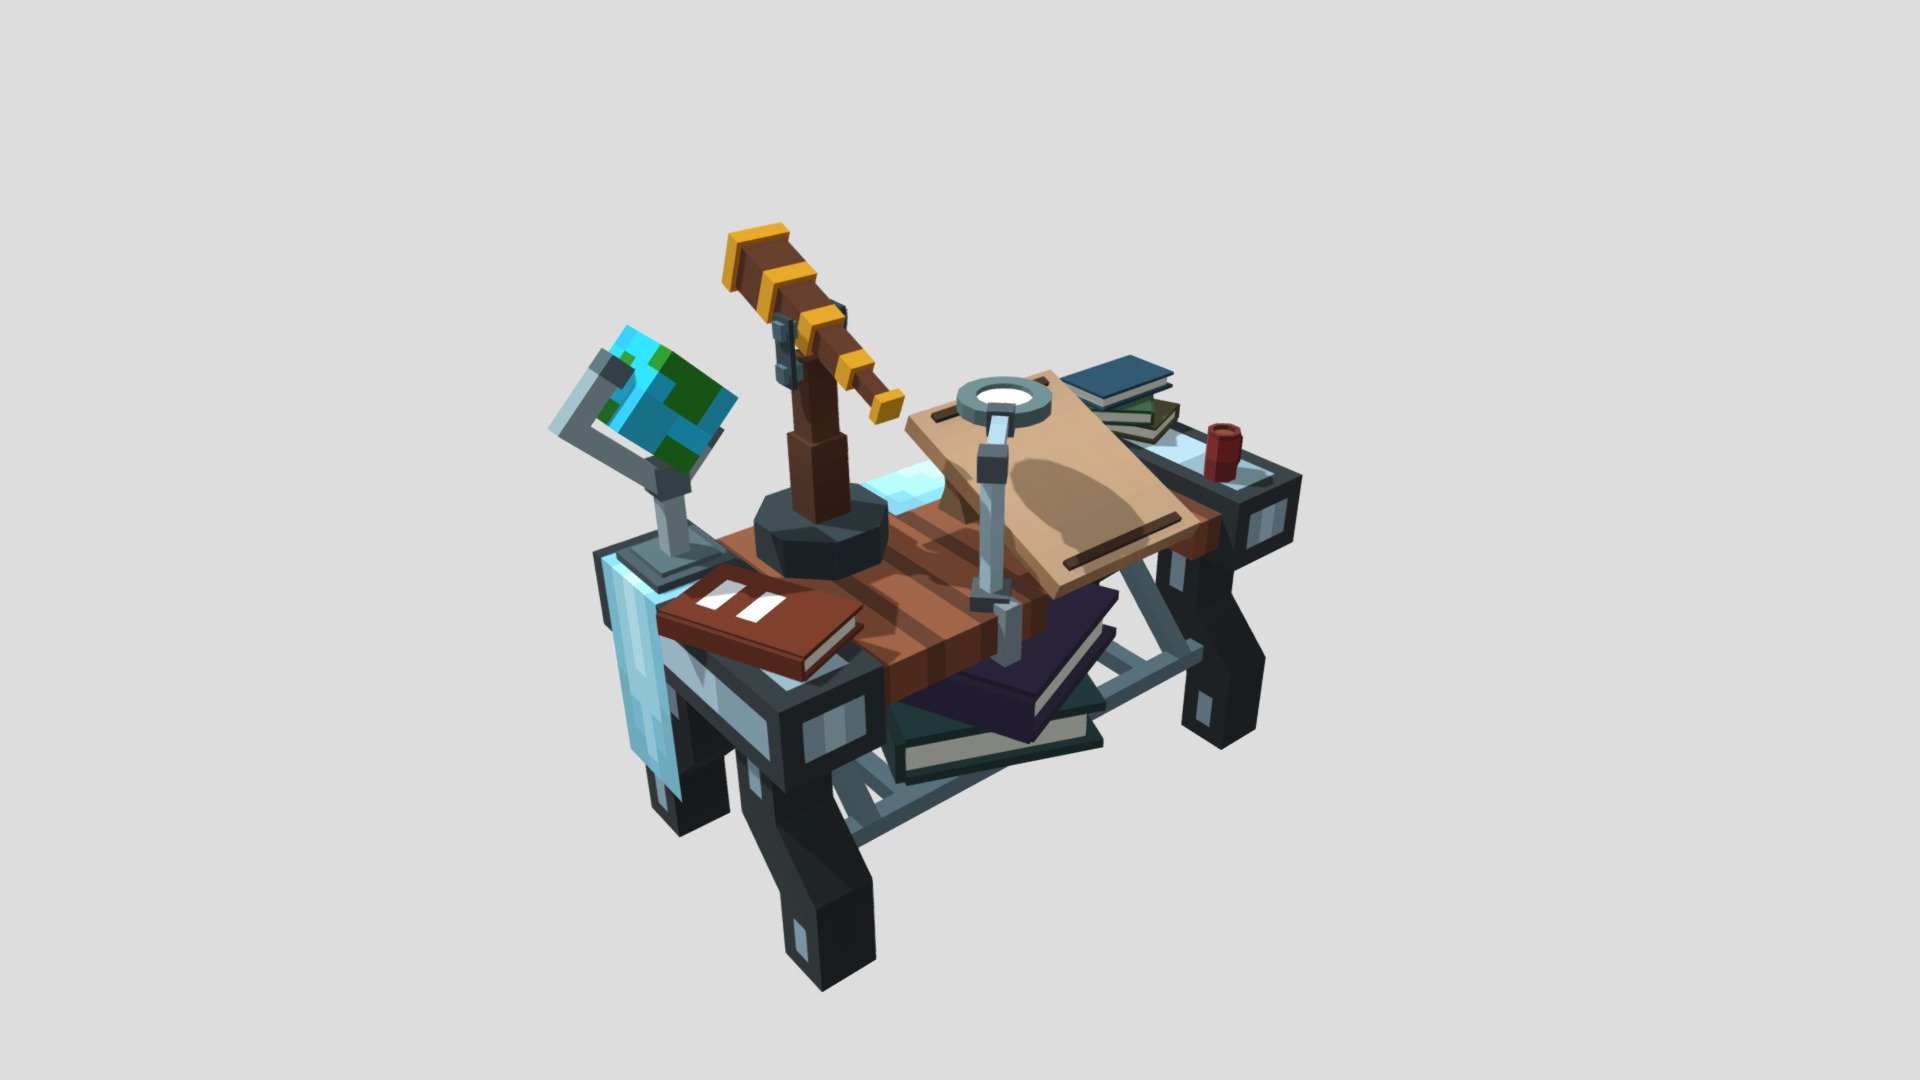 Made for Industrial Upgrade
https://www.curseforge.com/minecraft/mc-mods/industrial-upgrade - Research table - 3D model by AsLan (@AsLane) 3d model